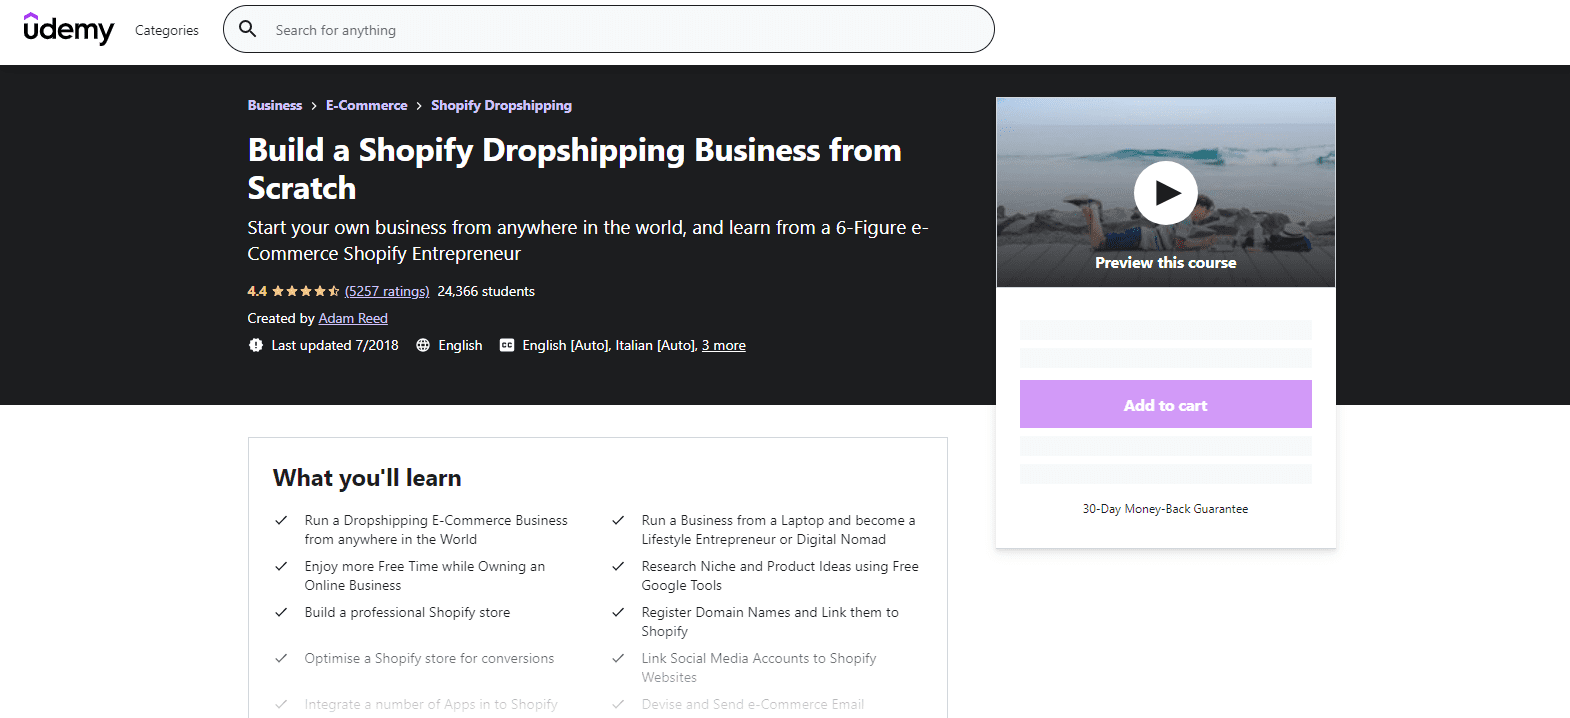 Build a Dropshipping Business from Scratch